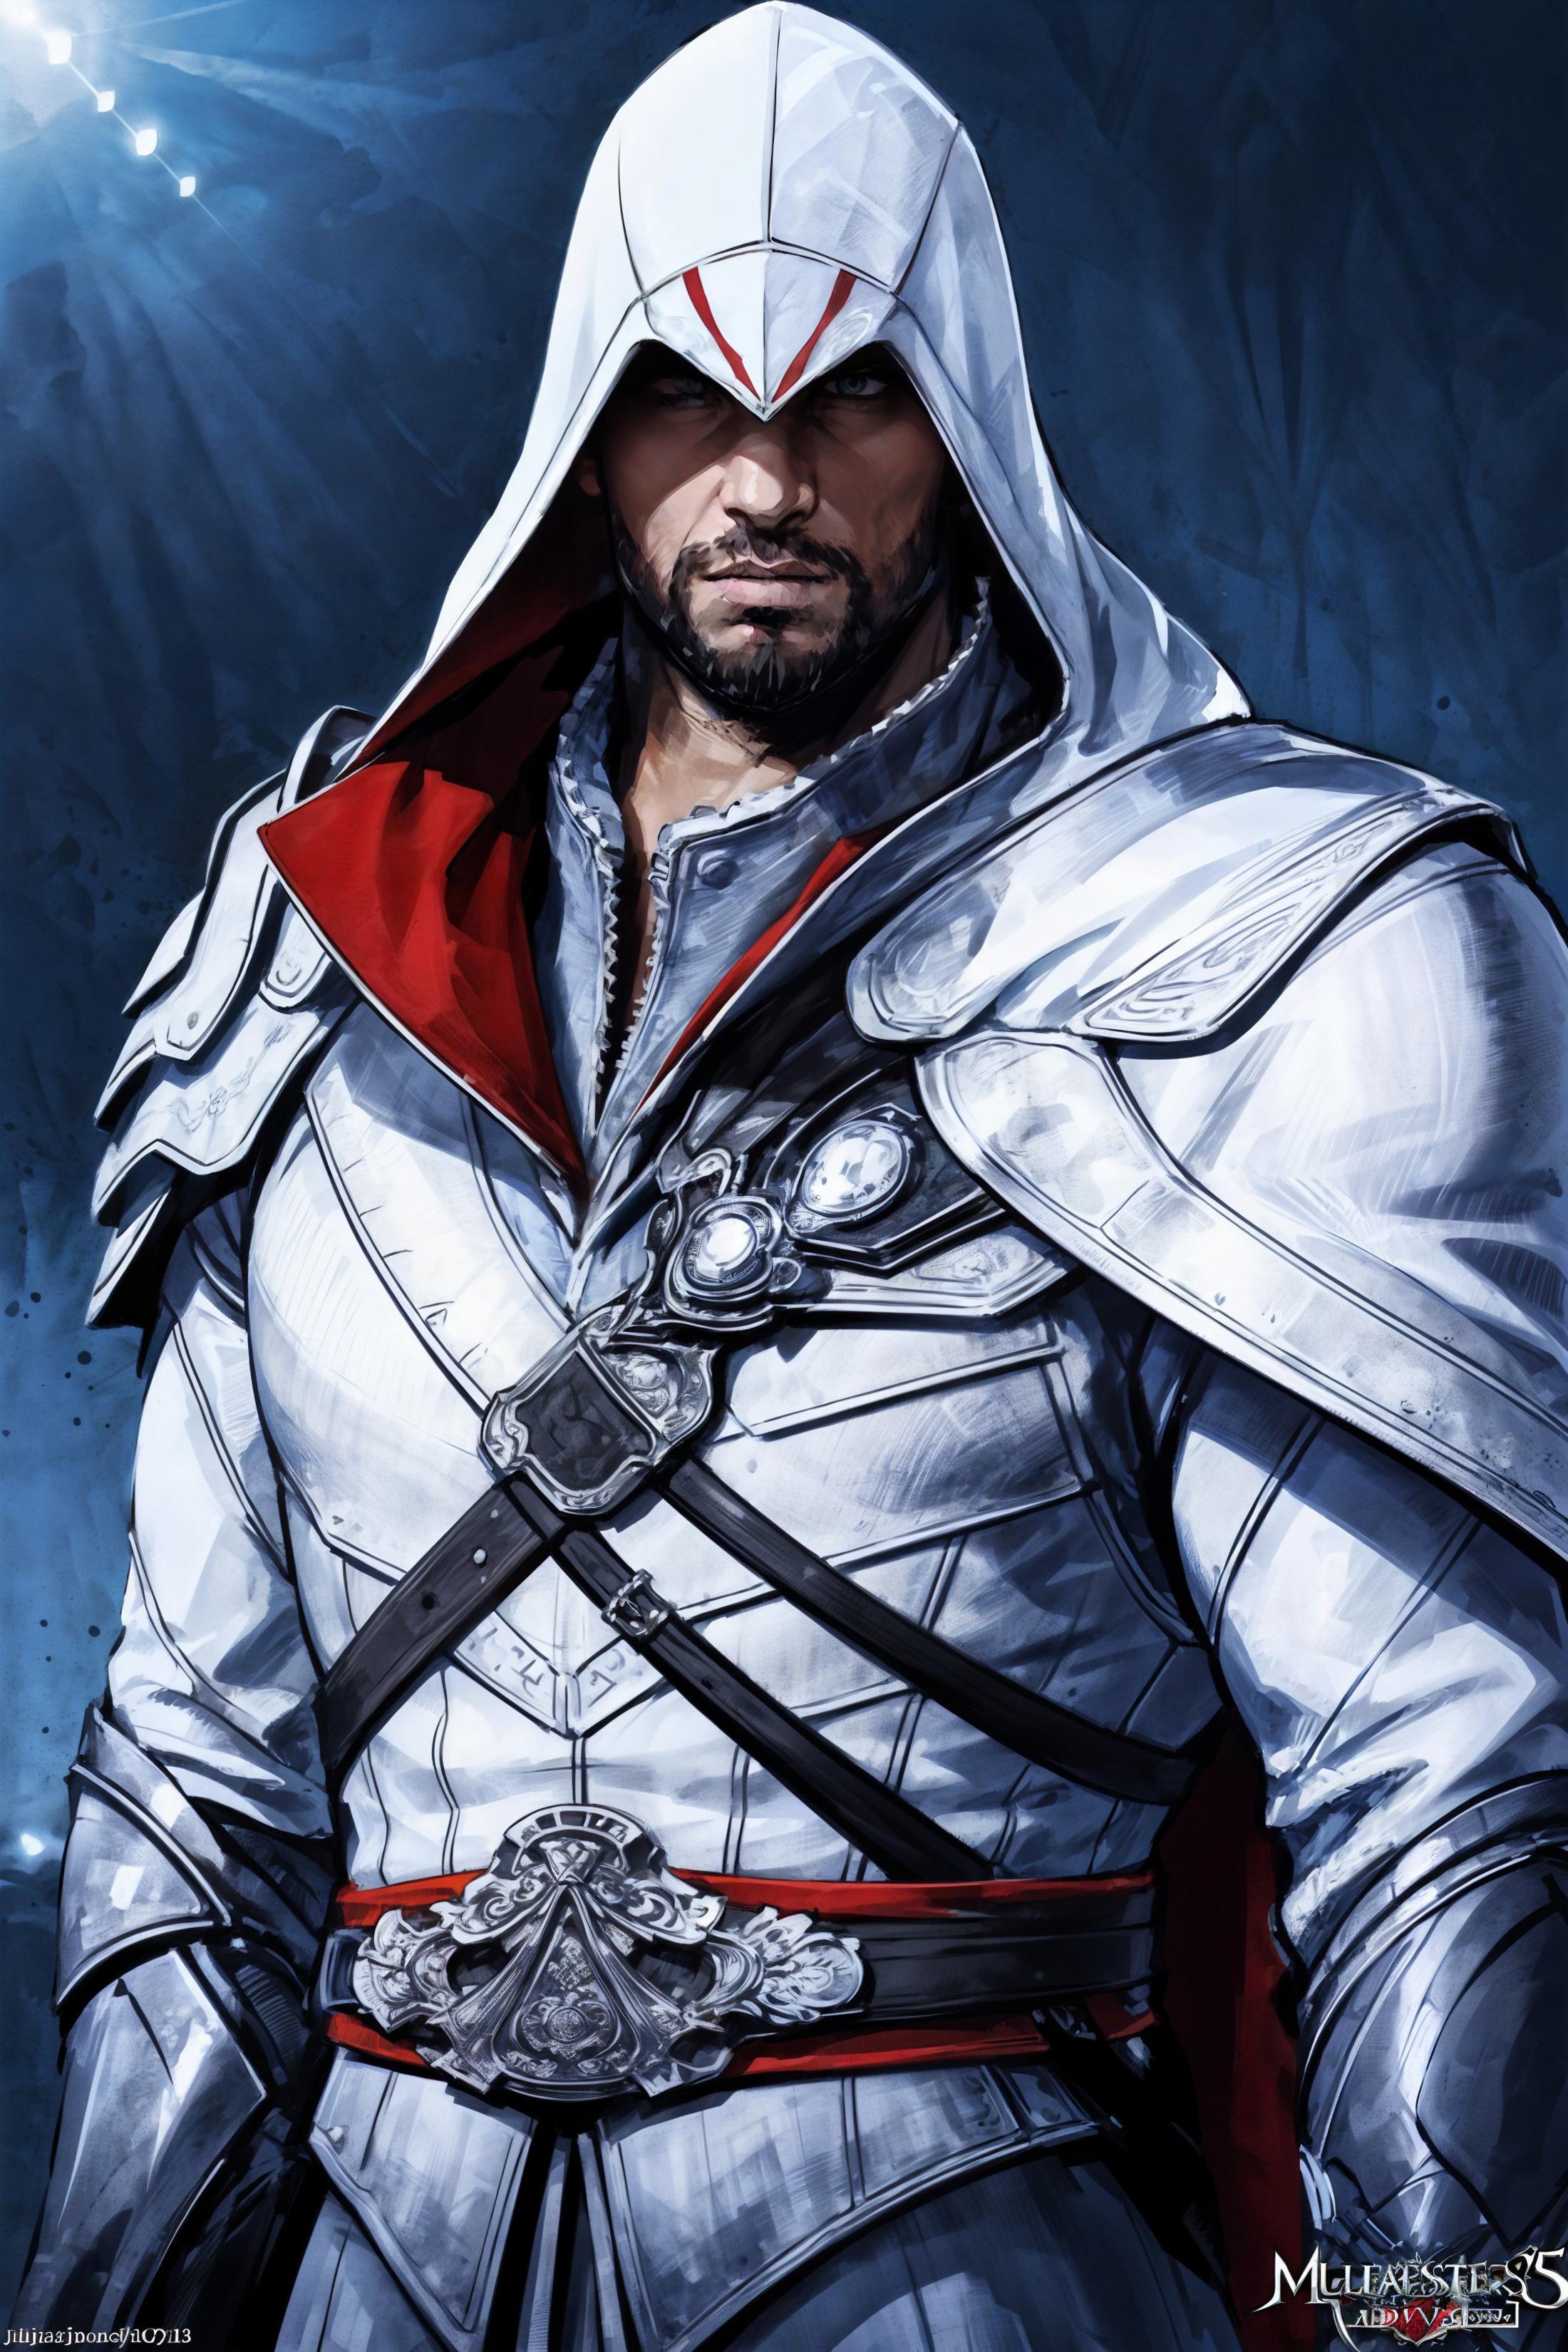 Ezio Auditore | Assassin's Creed Franchise image by soul3142